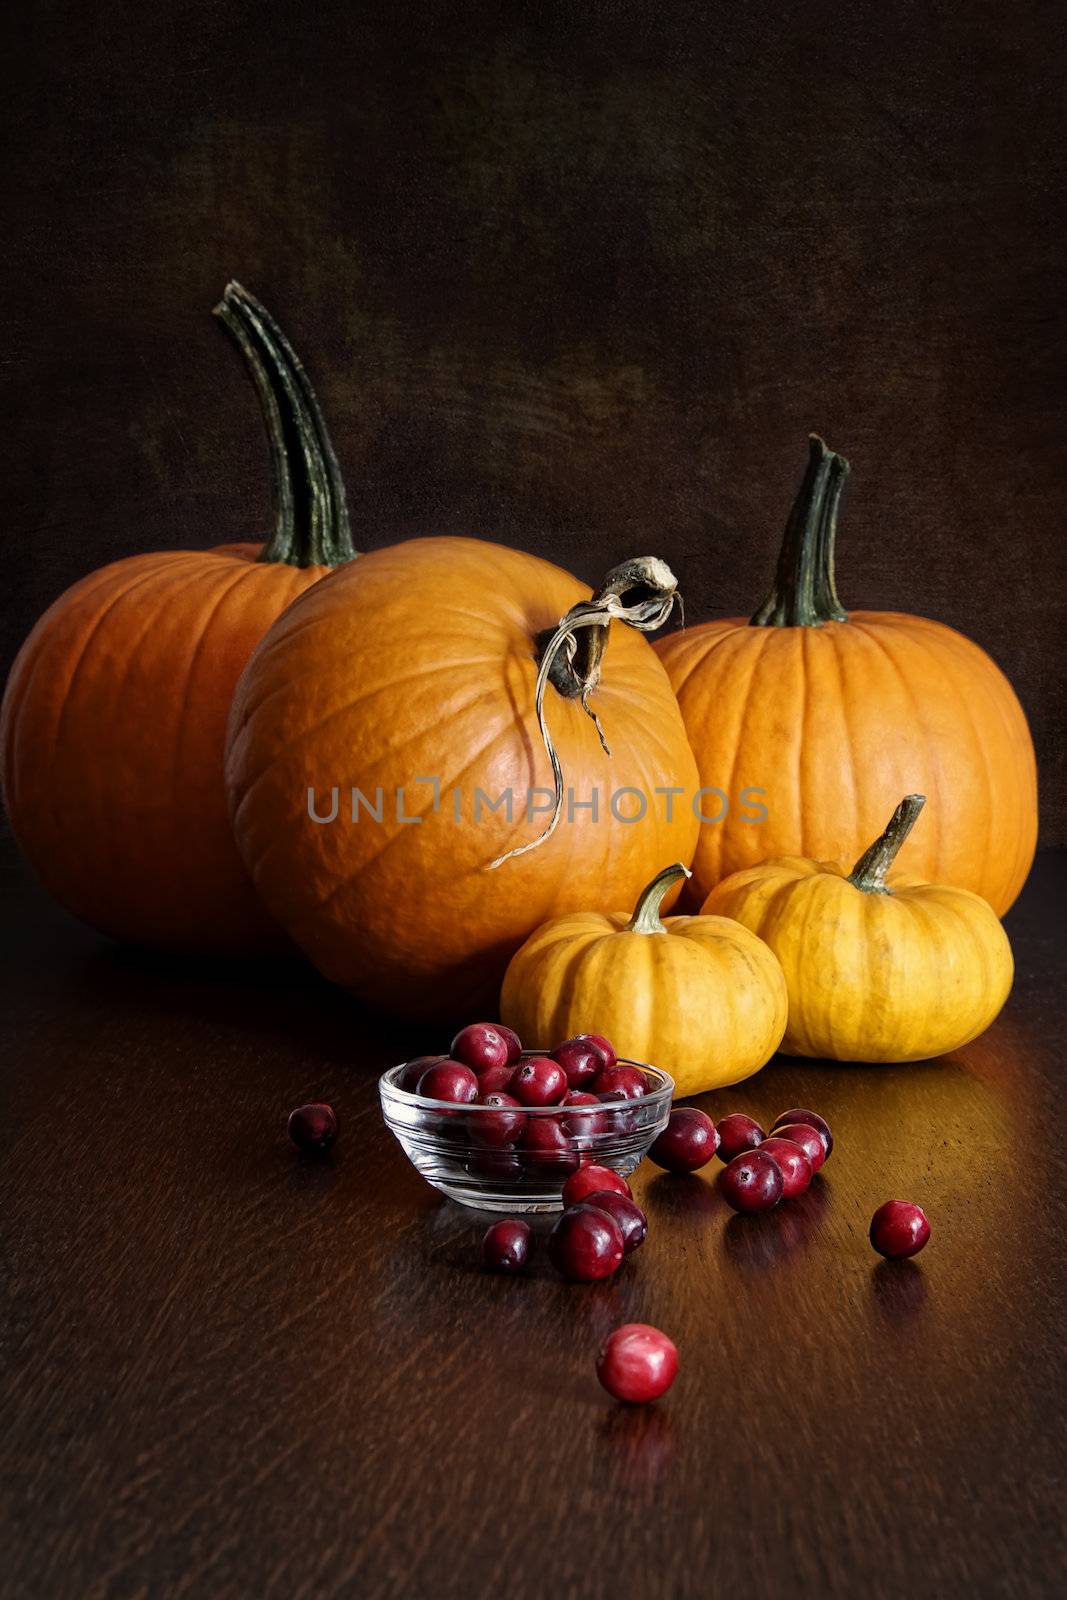 Pumpkins, gourds and cranberries on table by Sandralise